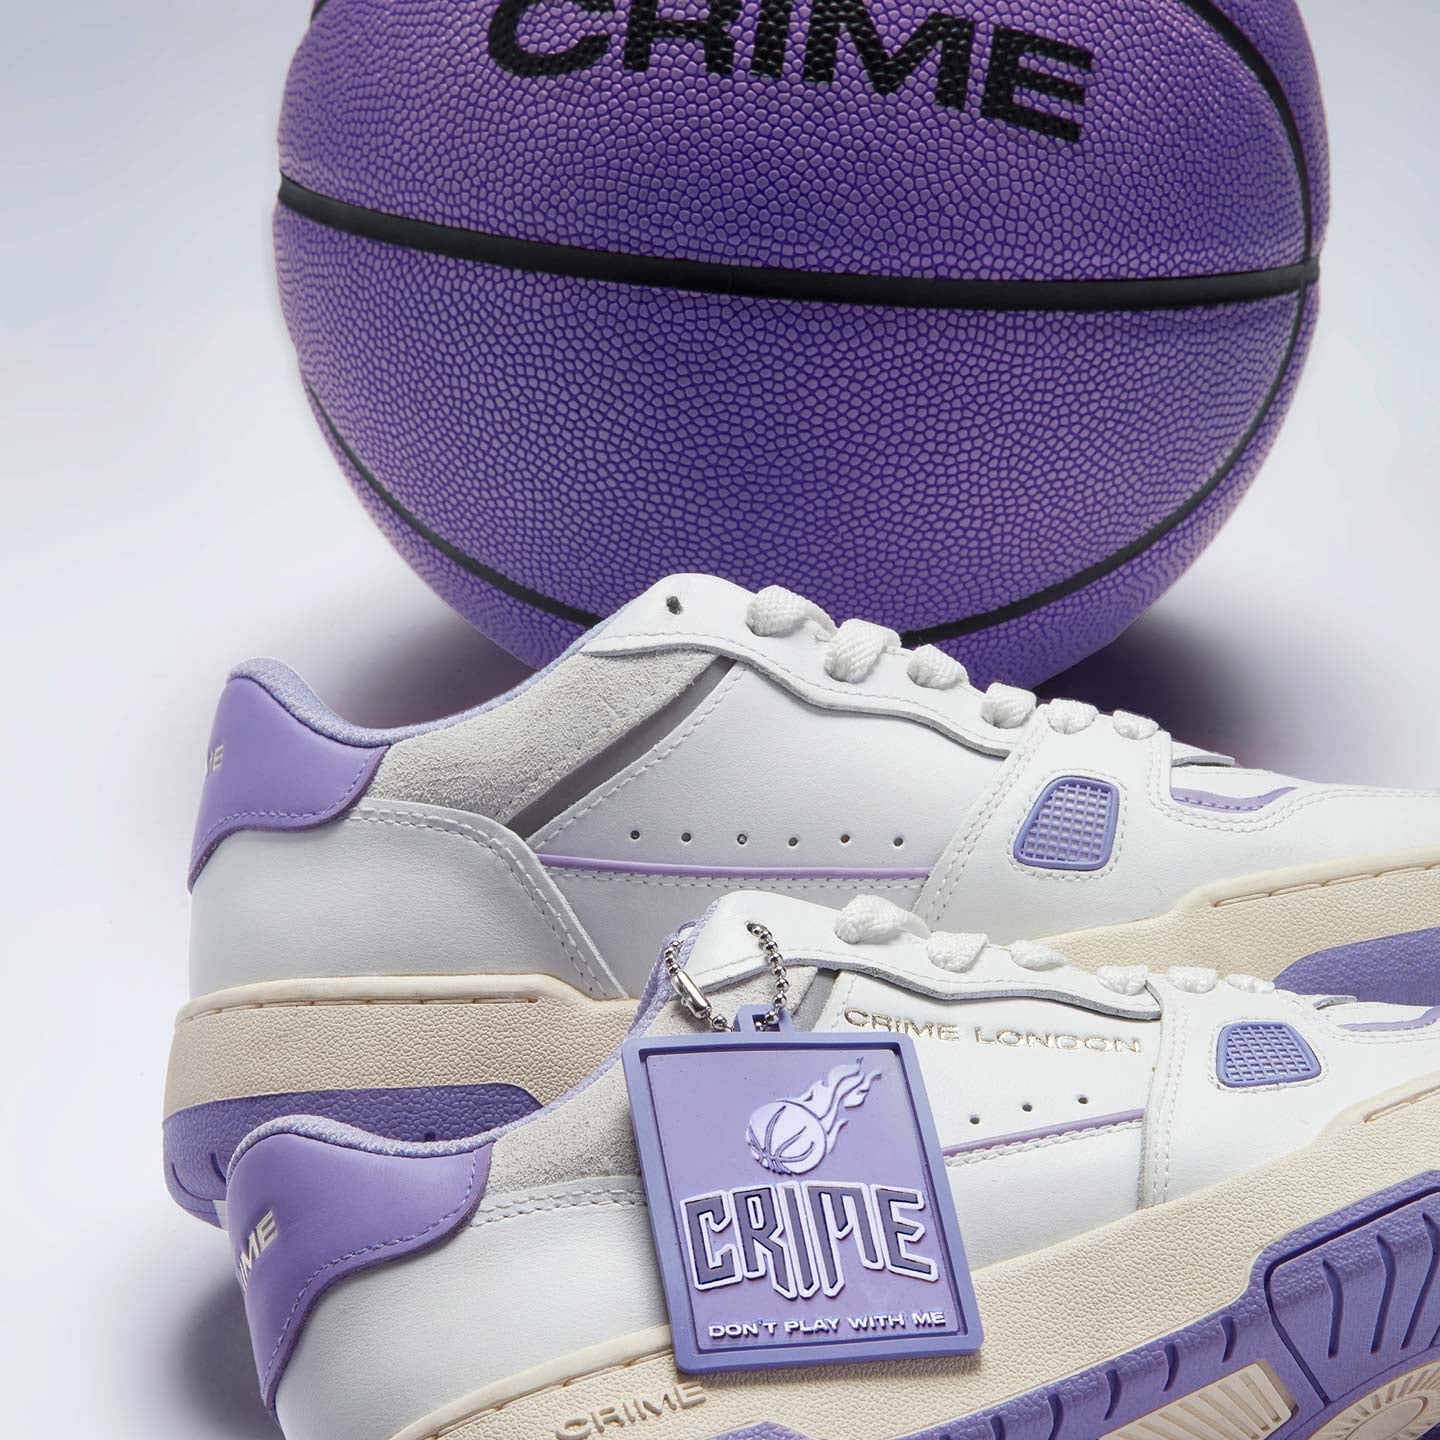 Sneakers “Off court” CRIME